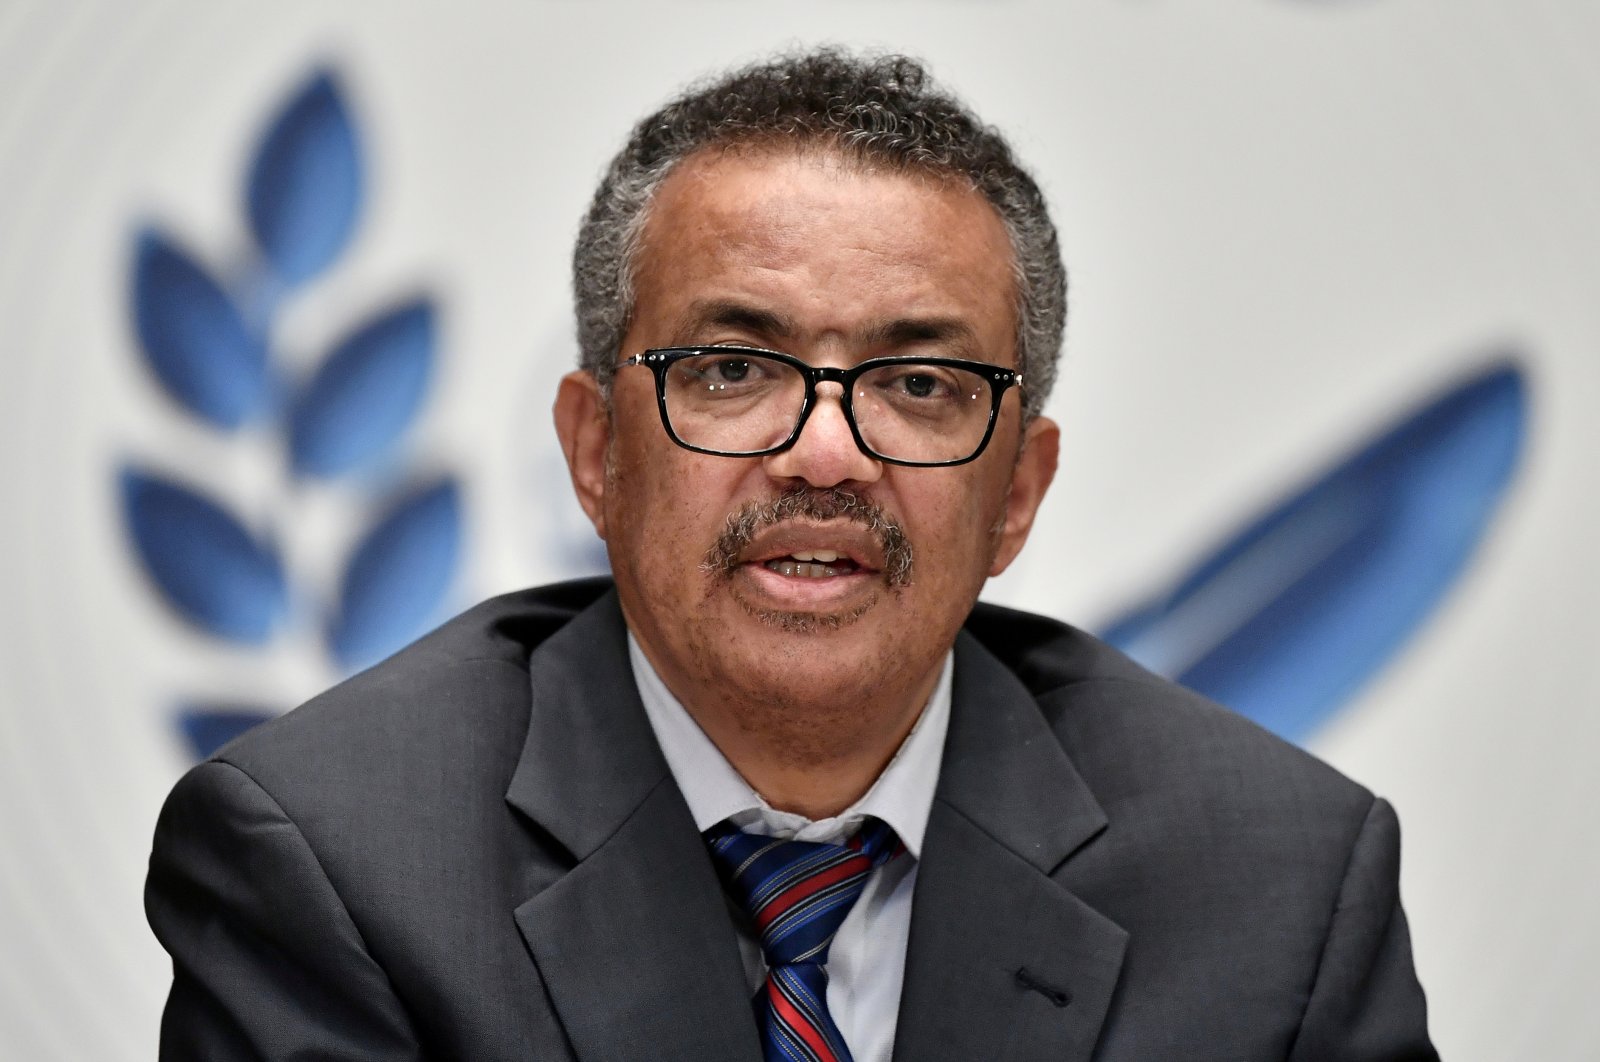 World Health Organization (WHO) Director-General Tedros Adhanom Ghebreyesus speaks at a news conference organized by the Geneva Association of United Nations Correspondents (ACANU) amid the COVID-19 outbreak, caused by the coronavirus, at the WHO headquarters in Geneva, Switzerland, July 3, 2020. (REUTERS Photo)